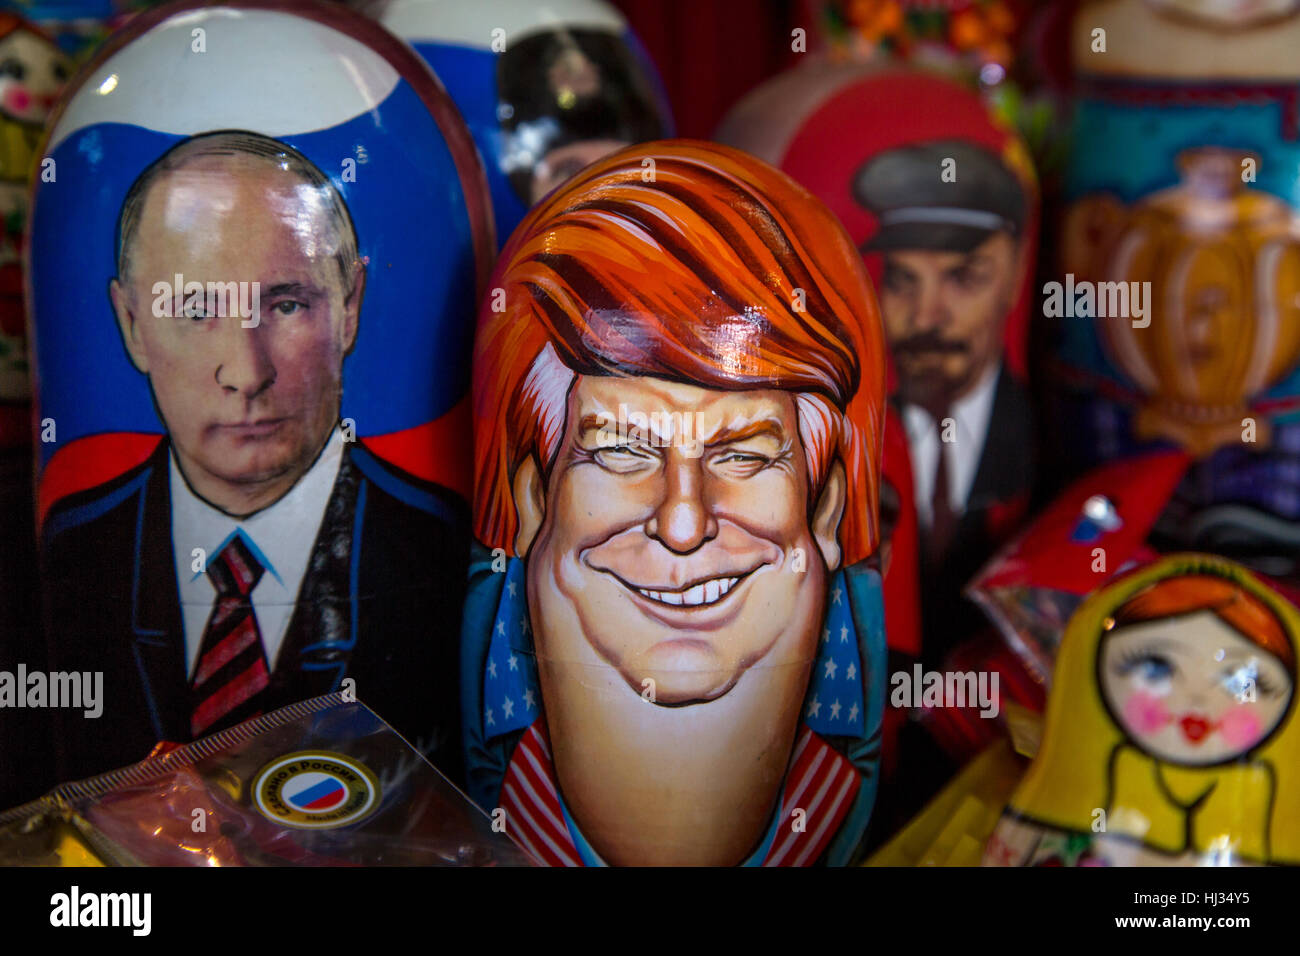 Russian traditional toys - Matryoshka with a portrait of Donald Trump in souvenir kiosk on the Red square in Moscow, Russia Stock Photo